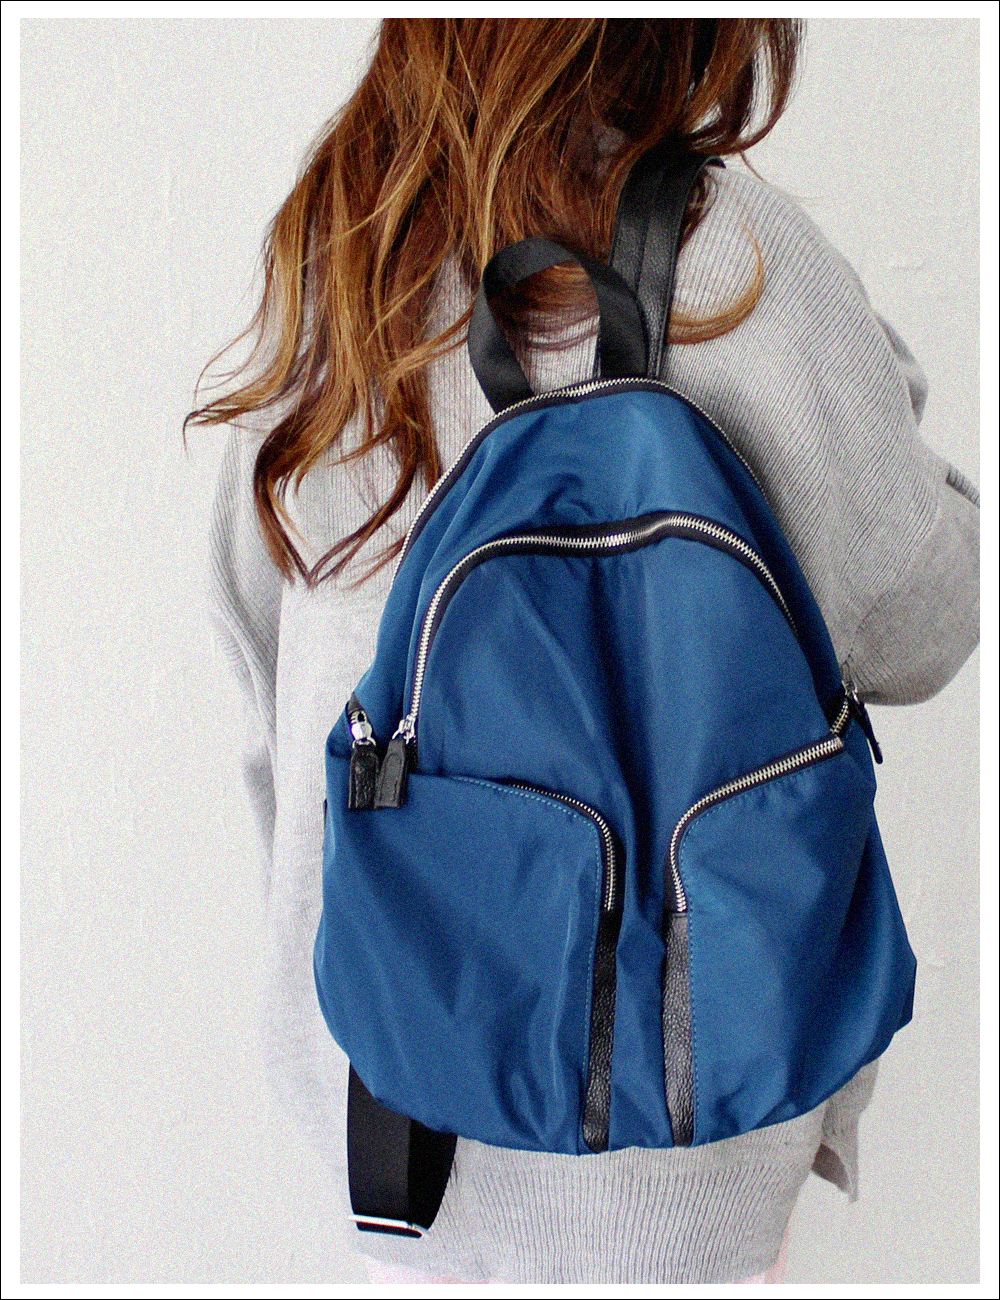 Too fine leather back pack_Blue